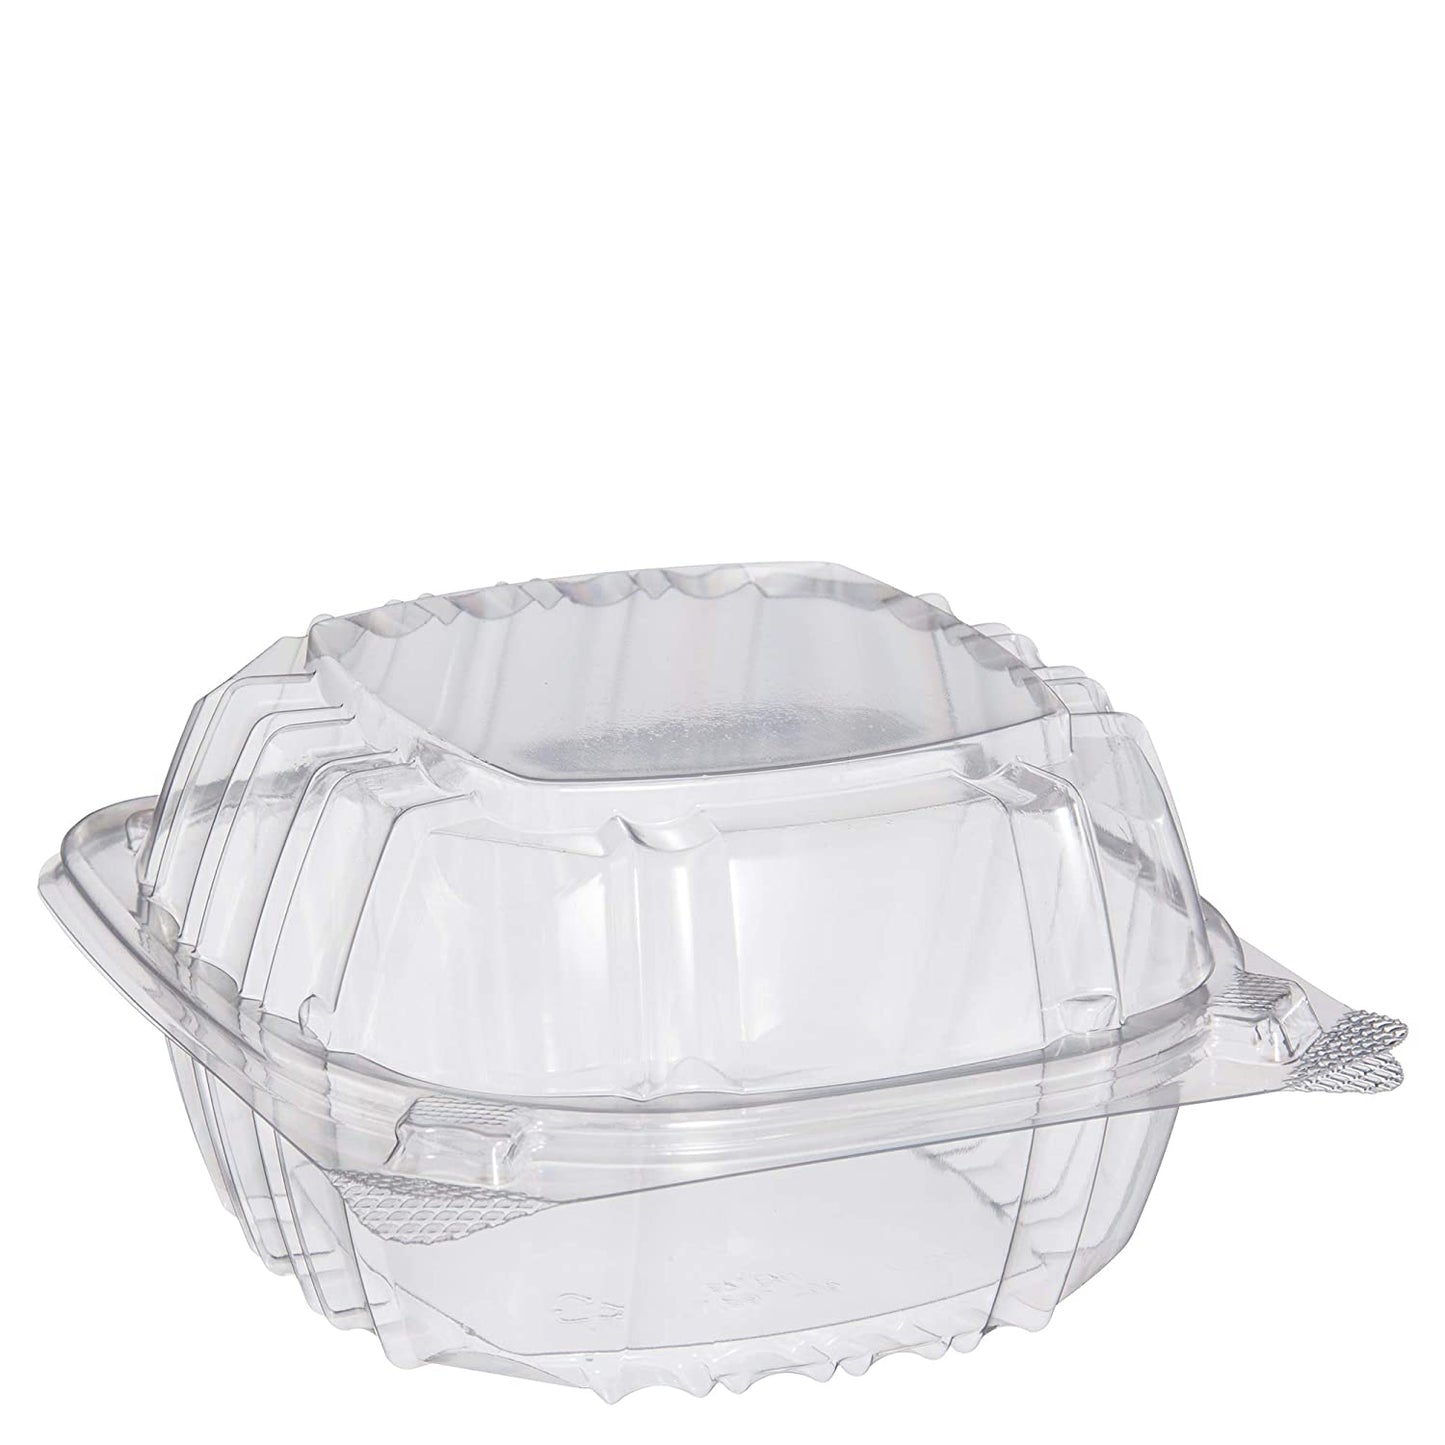 Carry-Out Food Container, Square, PK500